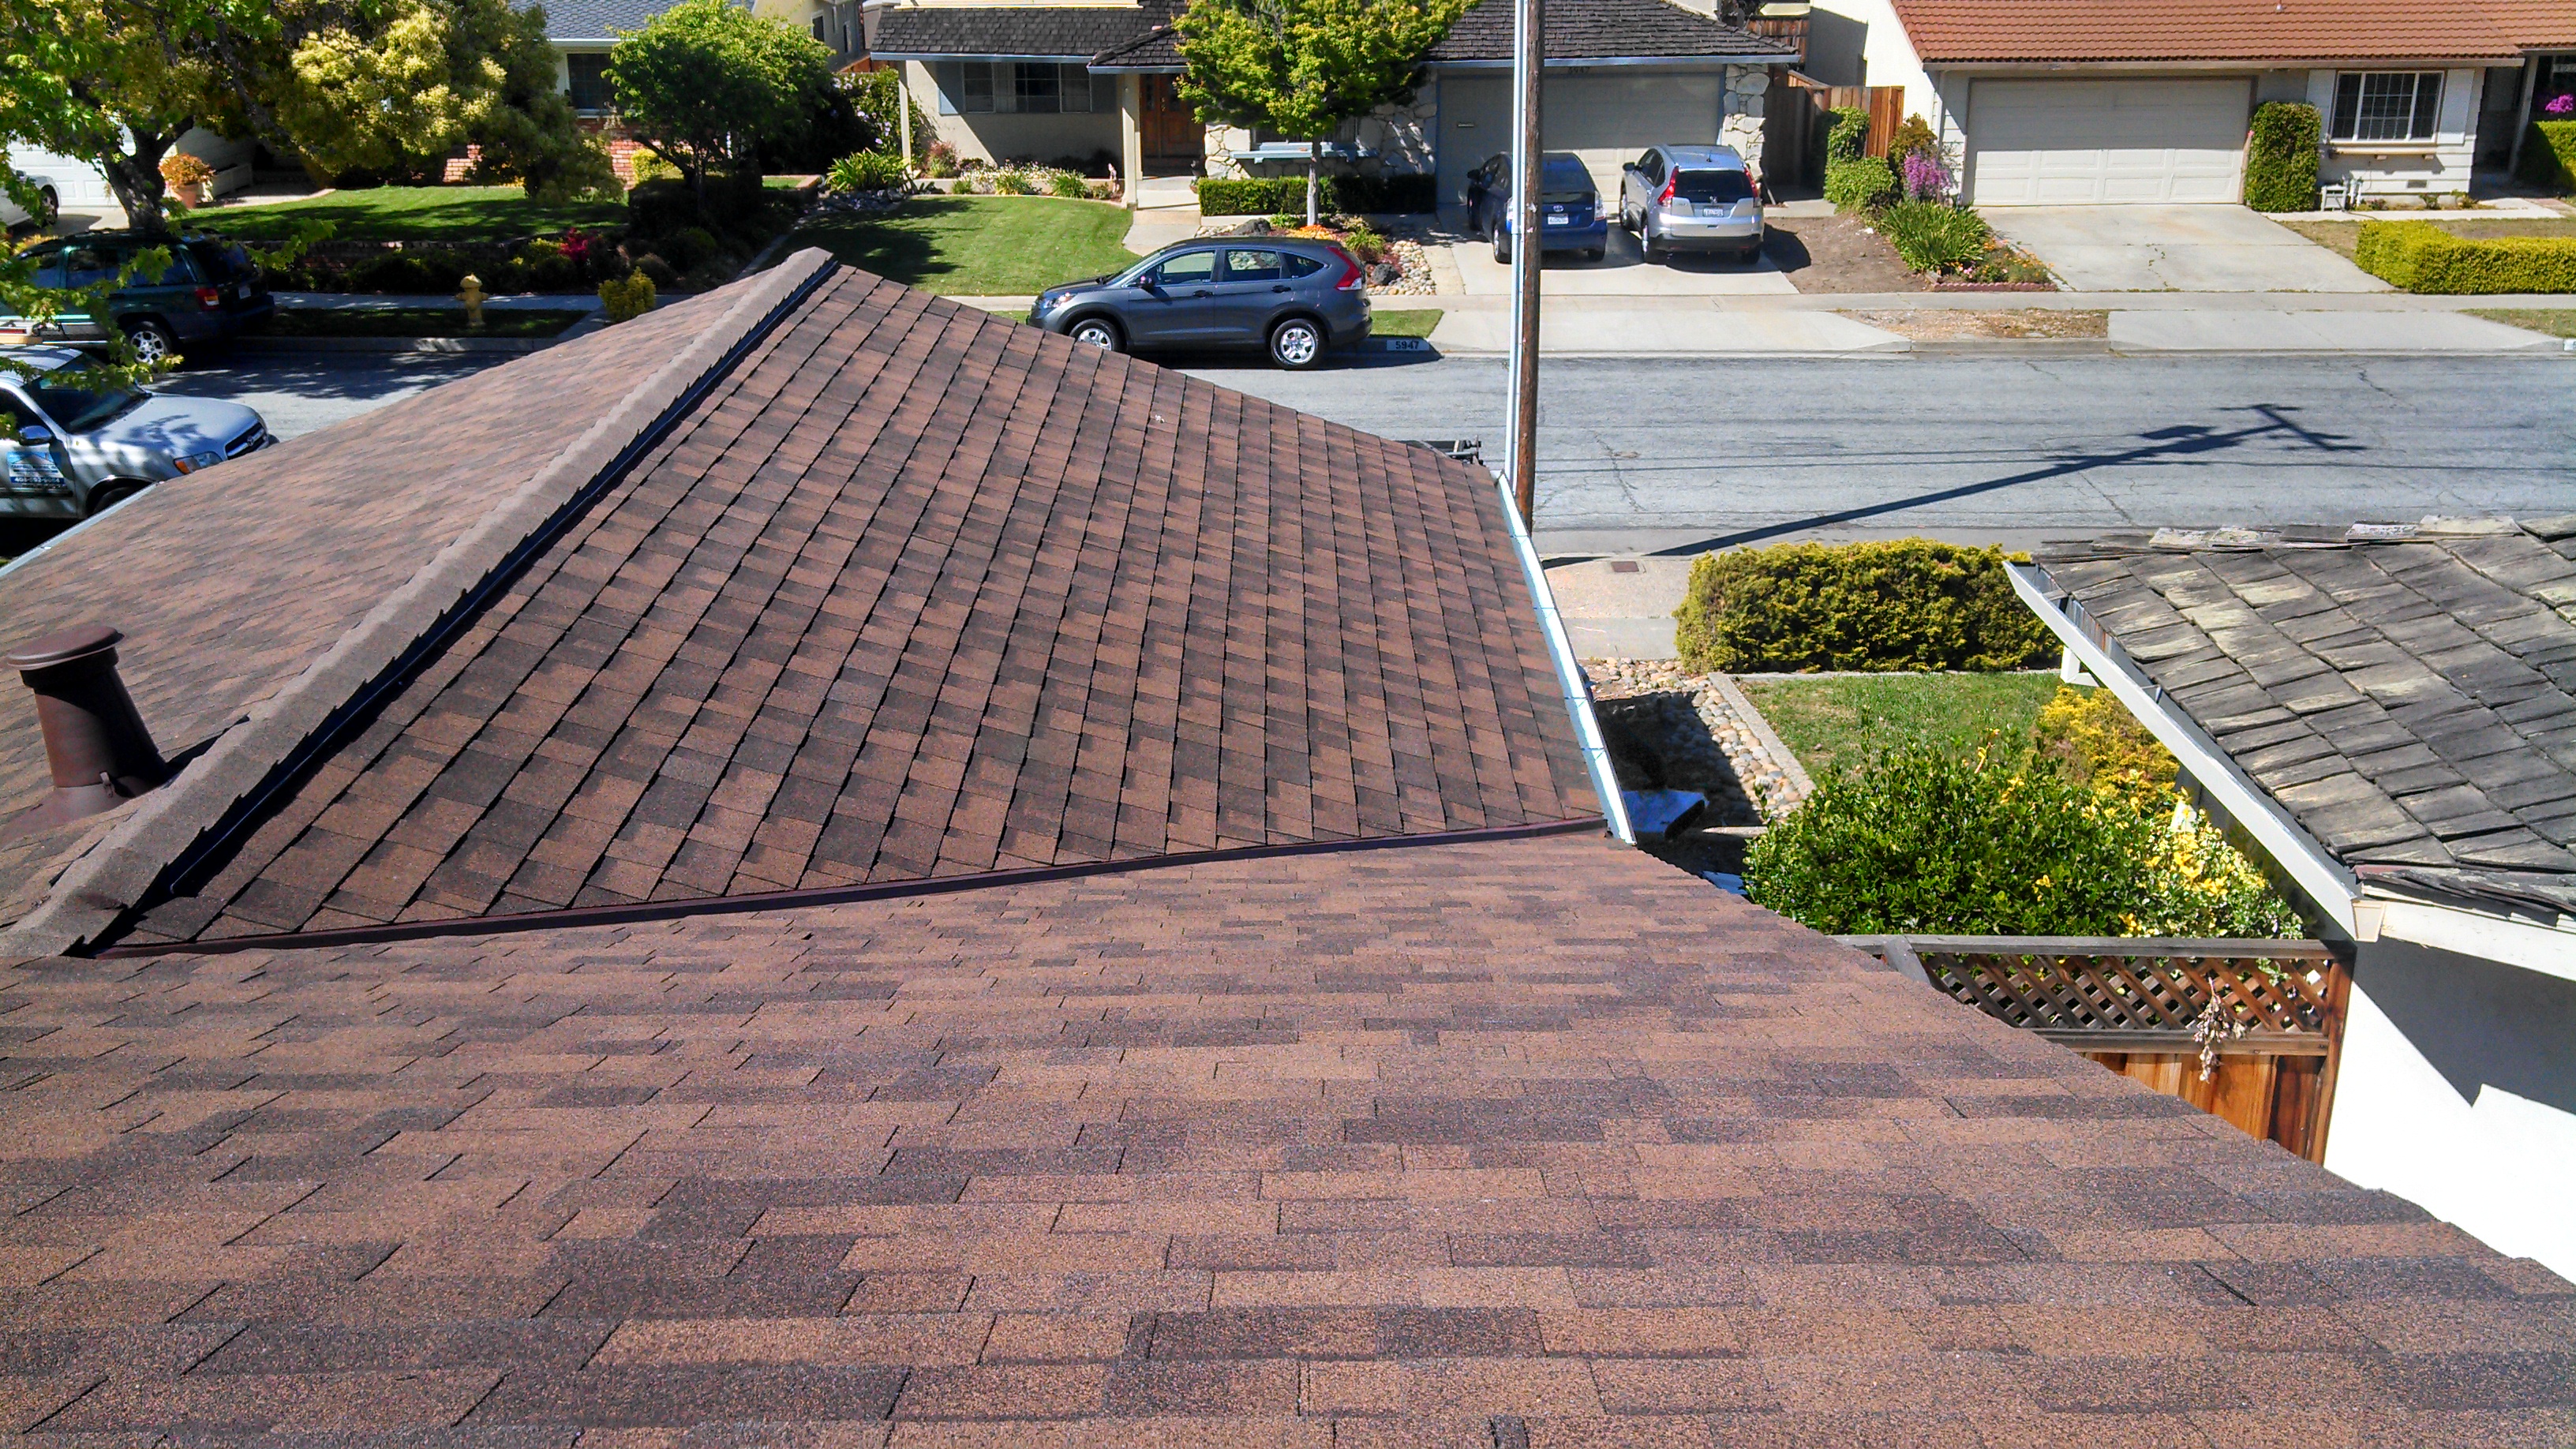 shingle replacement is part of our roofing services in Sunnyvale